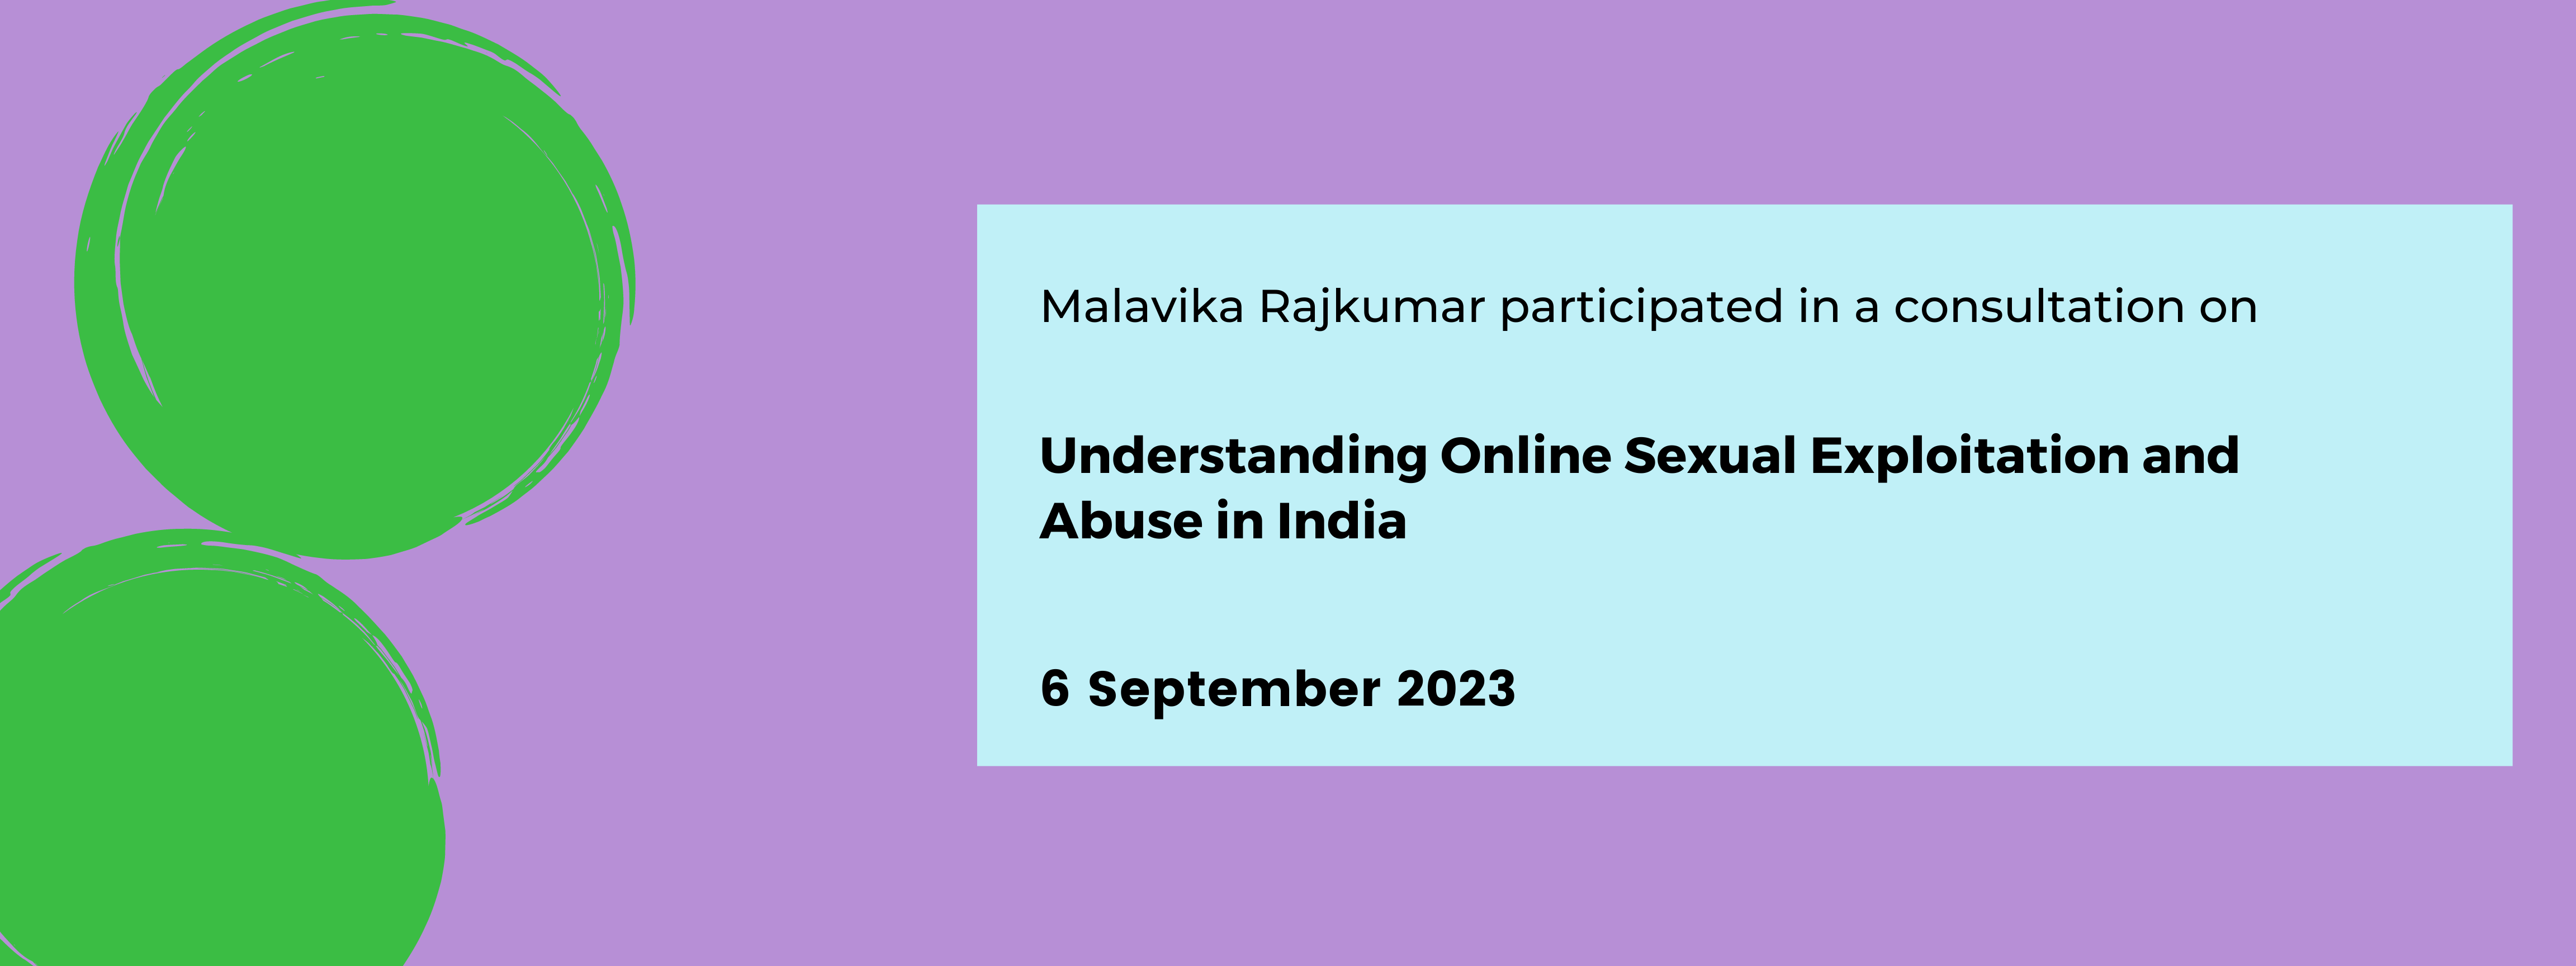 Understanding Online Sexual Exploitation and Abuse in India